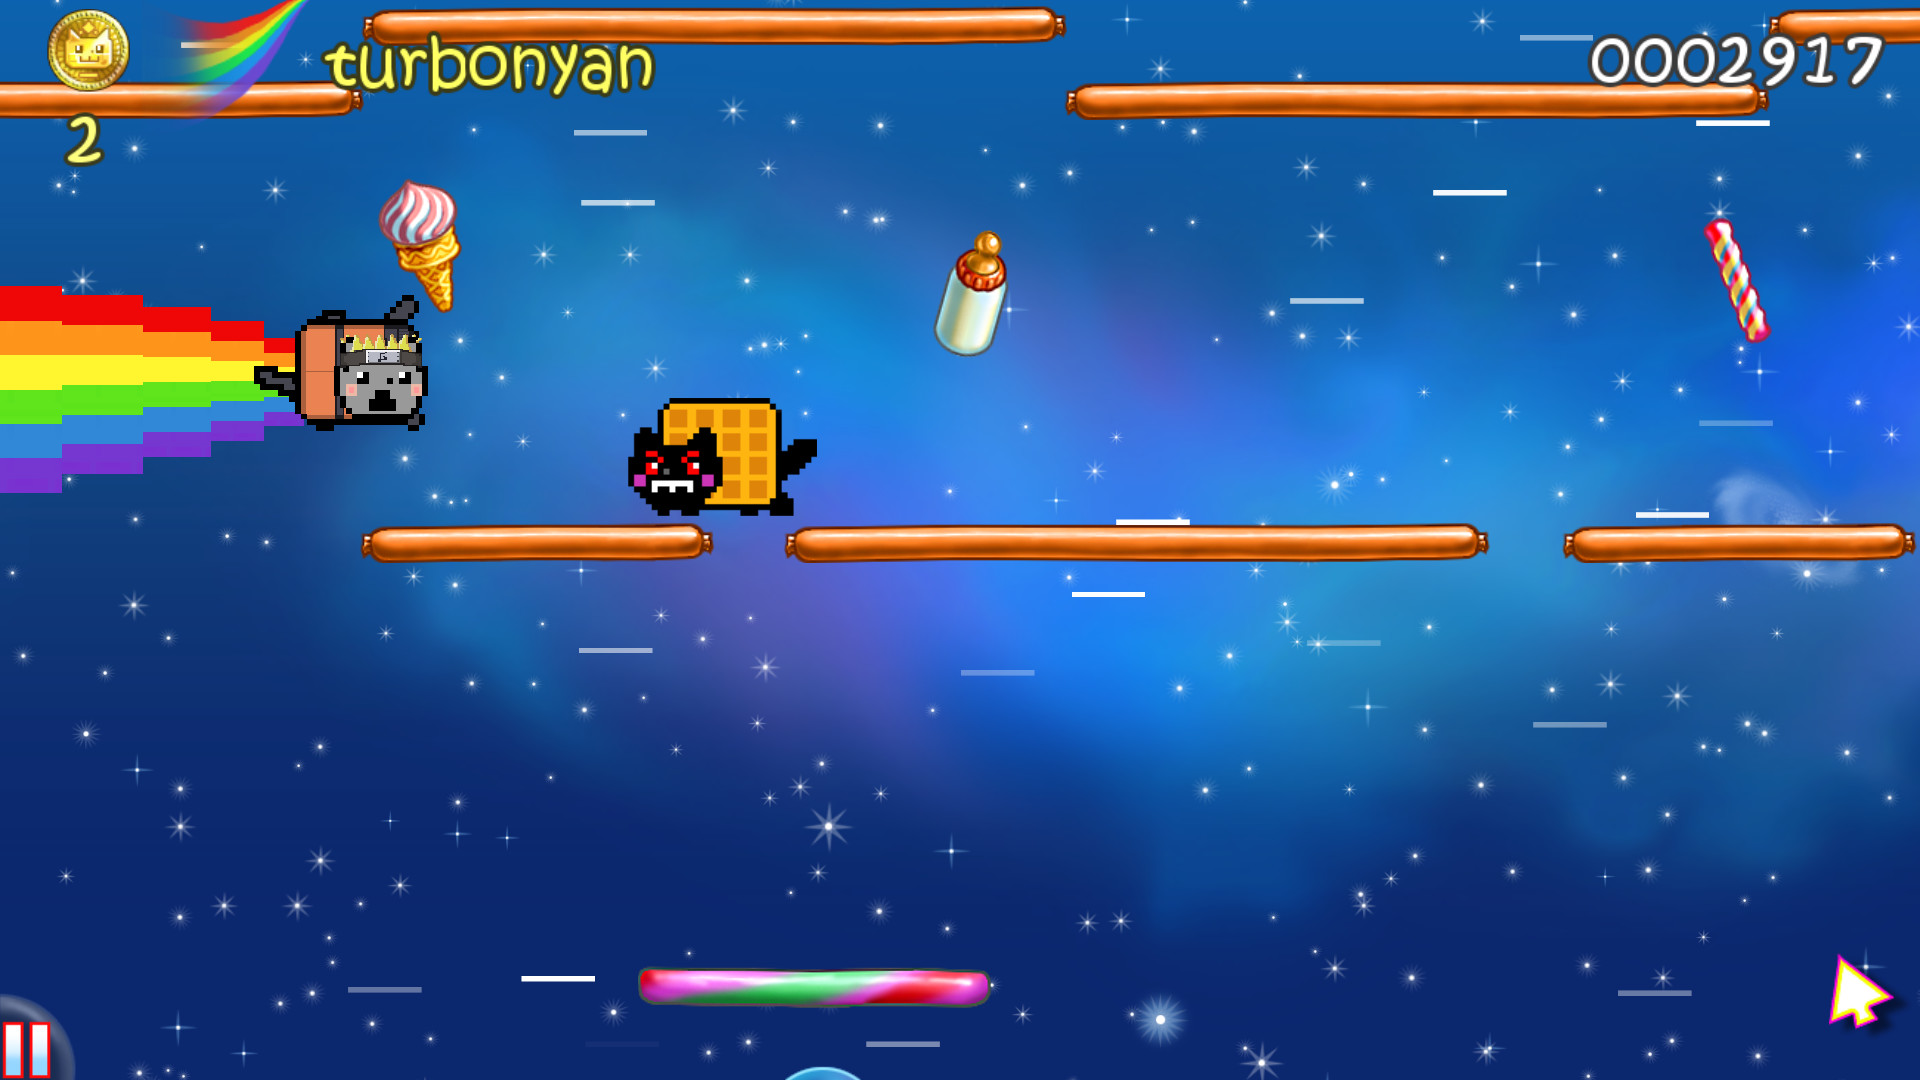 nyan cat lost in space horror